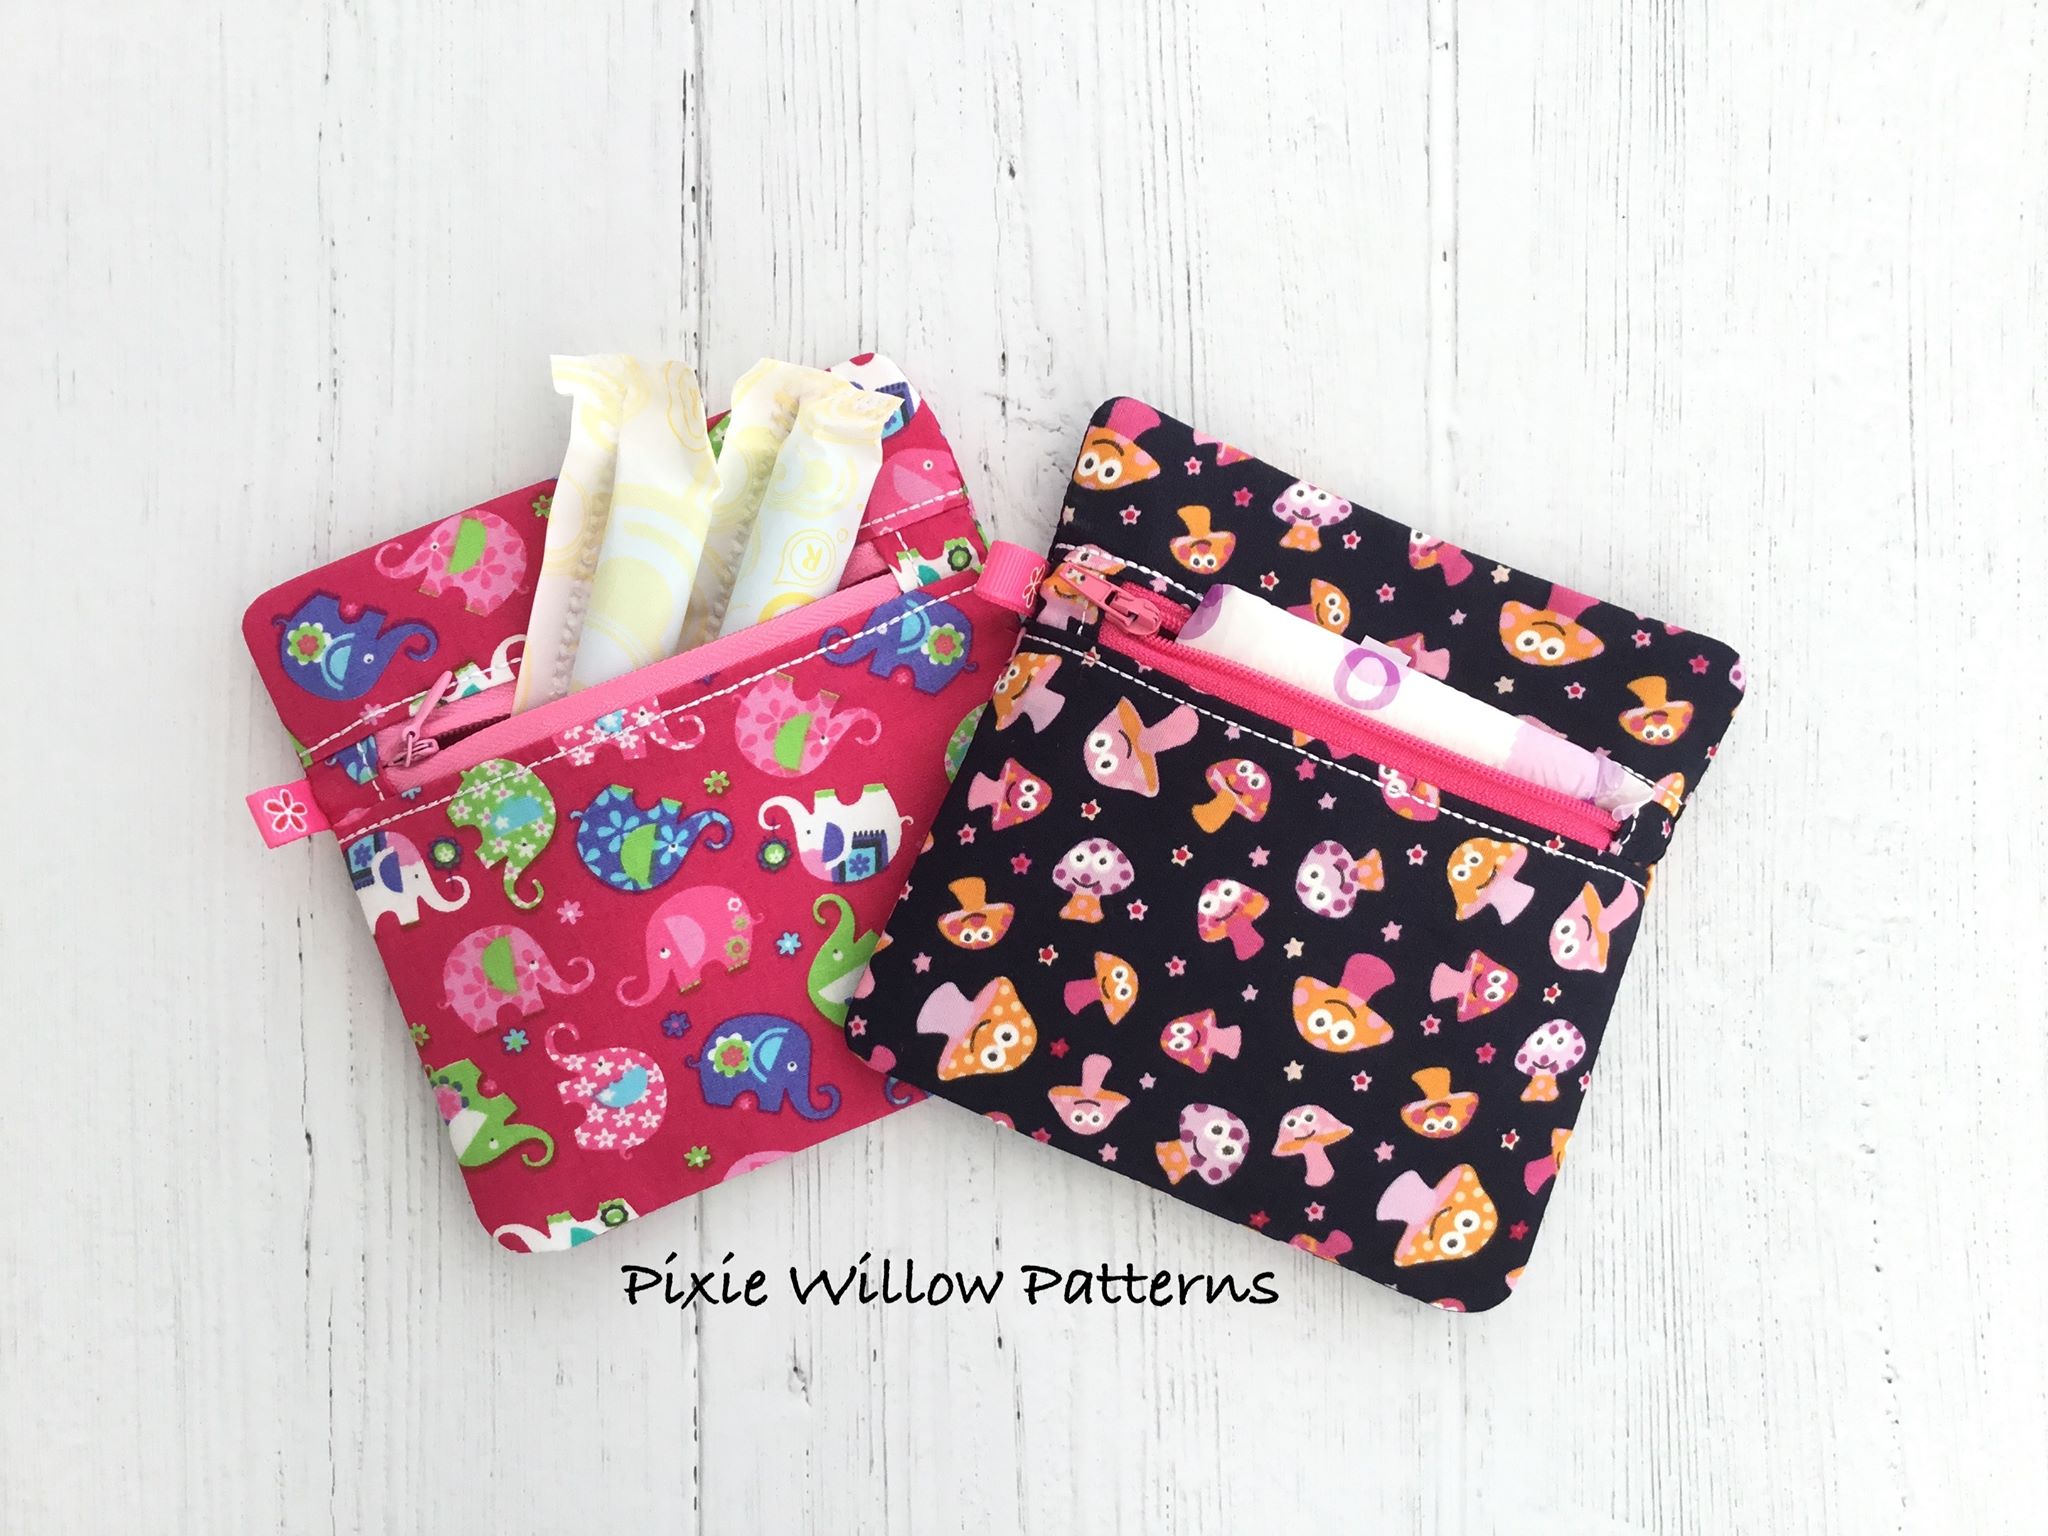 ITH zipper bag. Sanitary pads zipper bag. Fully lined, 6×6 square ...